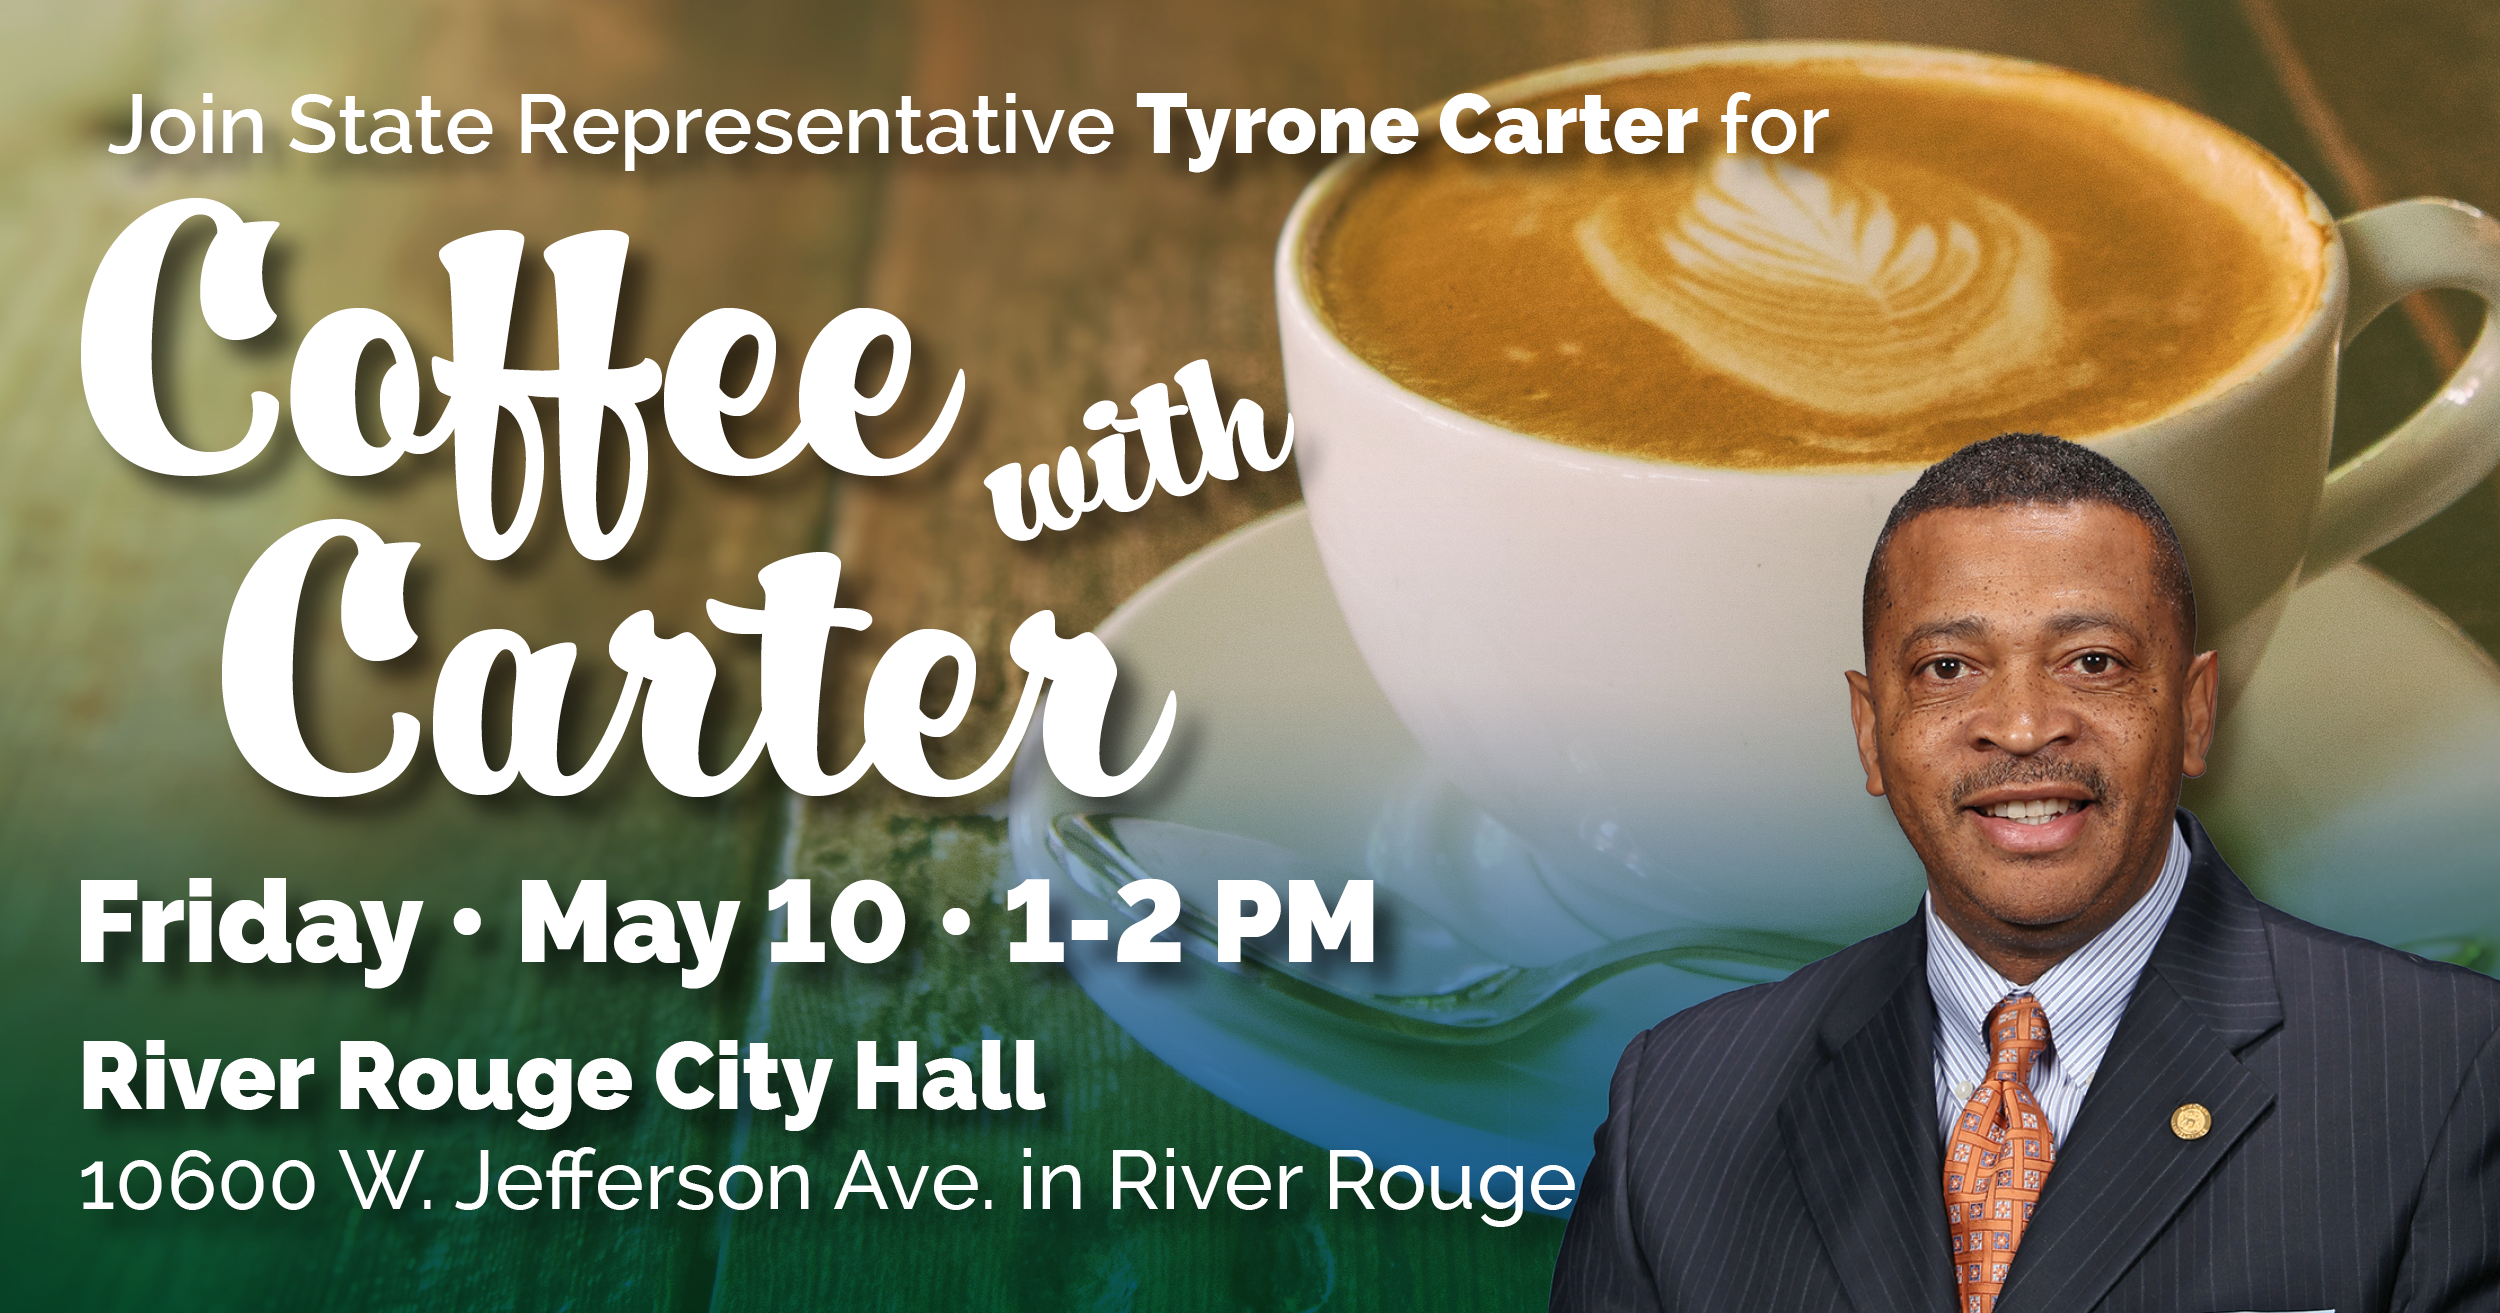 Text over a photo of a coffee mug and Michigan State Rep. Tyrone Carter reads, "Join State Representative Tyrone Carter for Coffee with Carter, Friday, May 10, 1-2 p.m. at River Rouge City Hall, 10600 W. Jefferson Ave. in River Rouge."